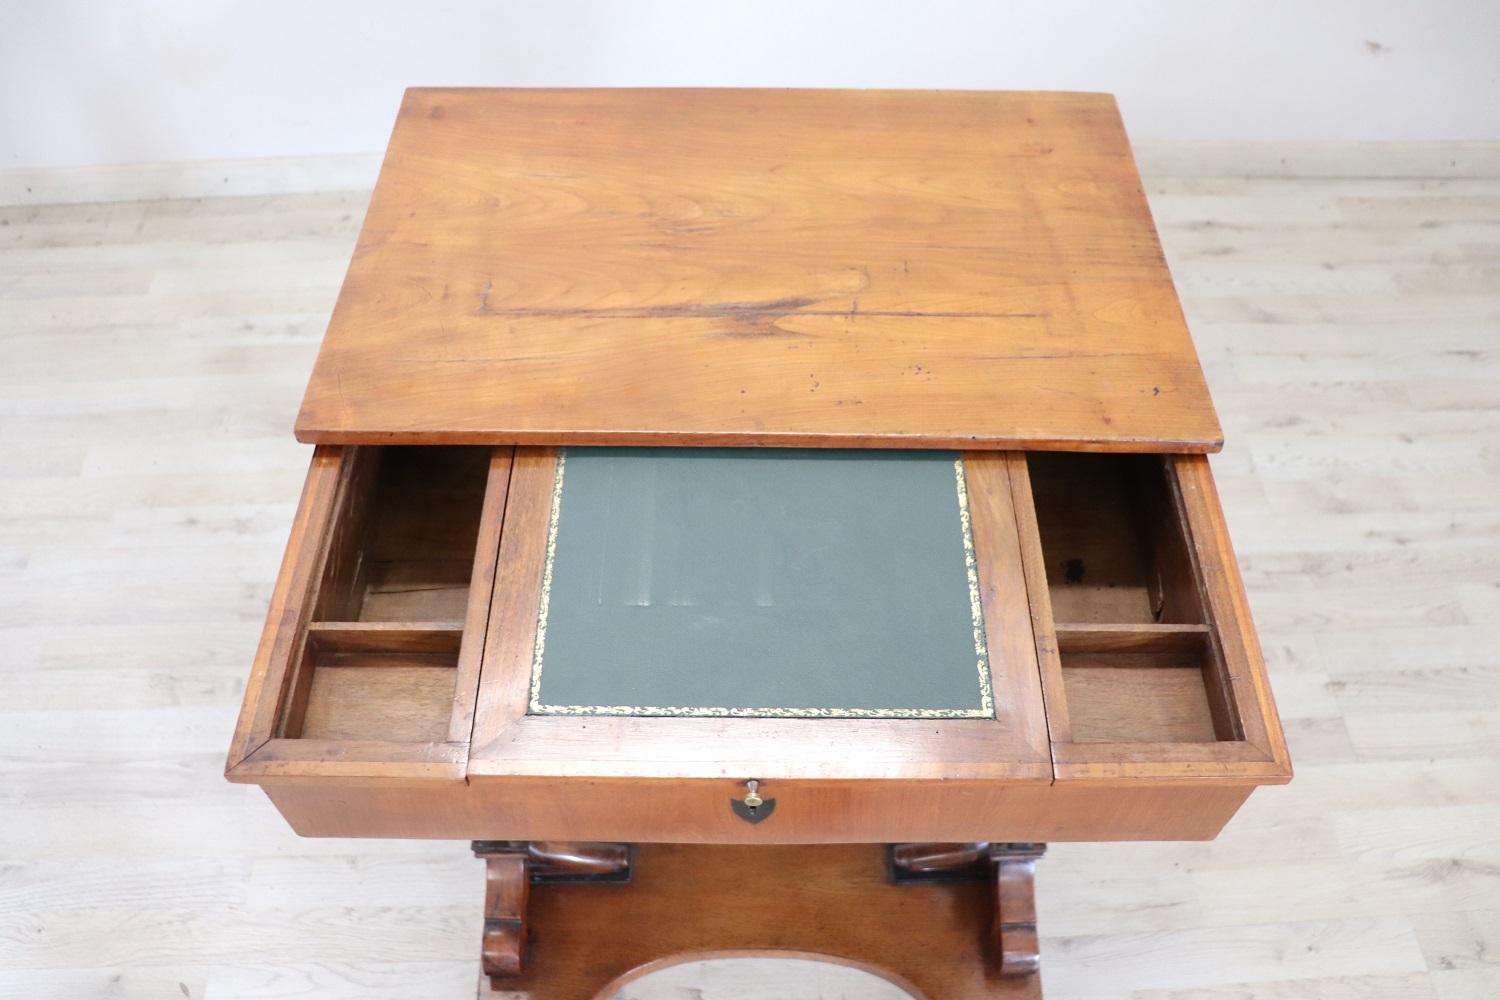 Early 19th Century Empire Cherry Wood Antique Side Table with Internal Desk Top 4